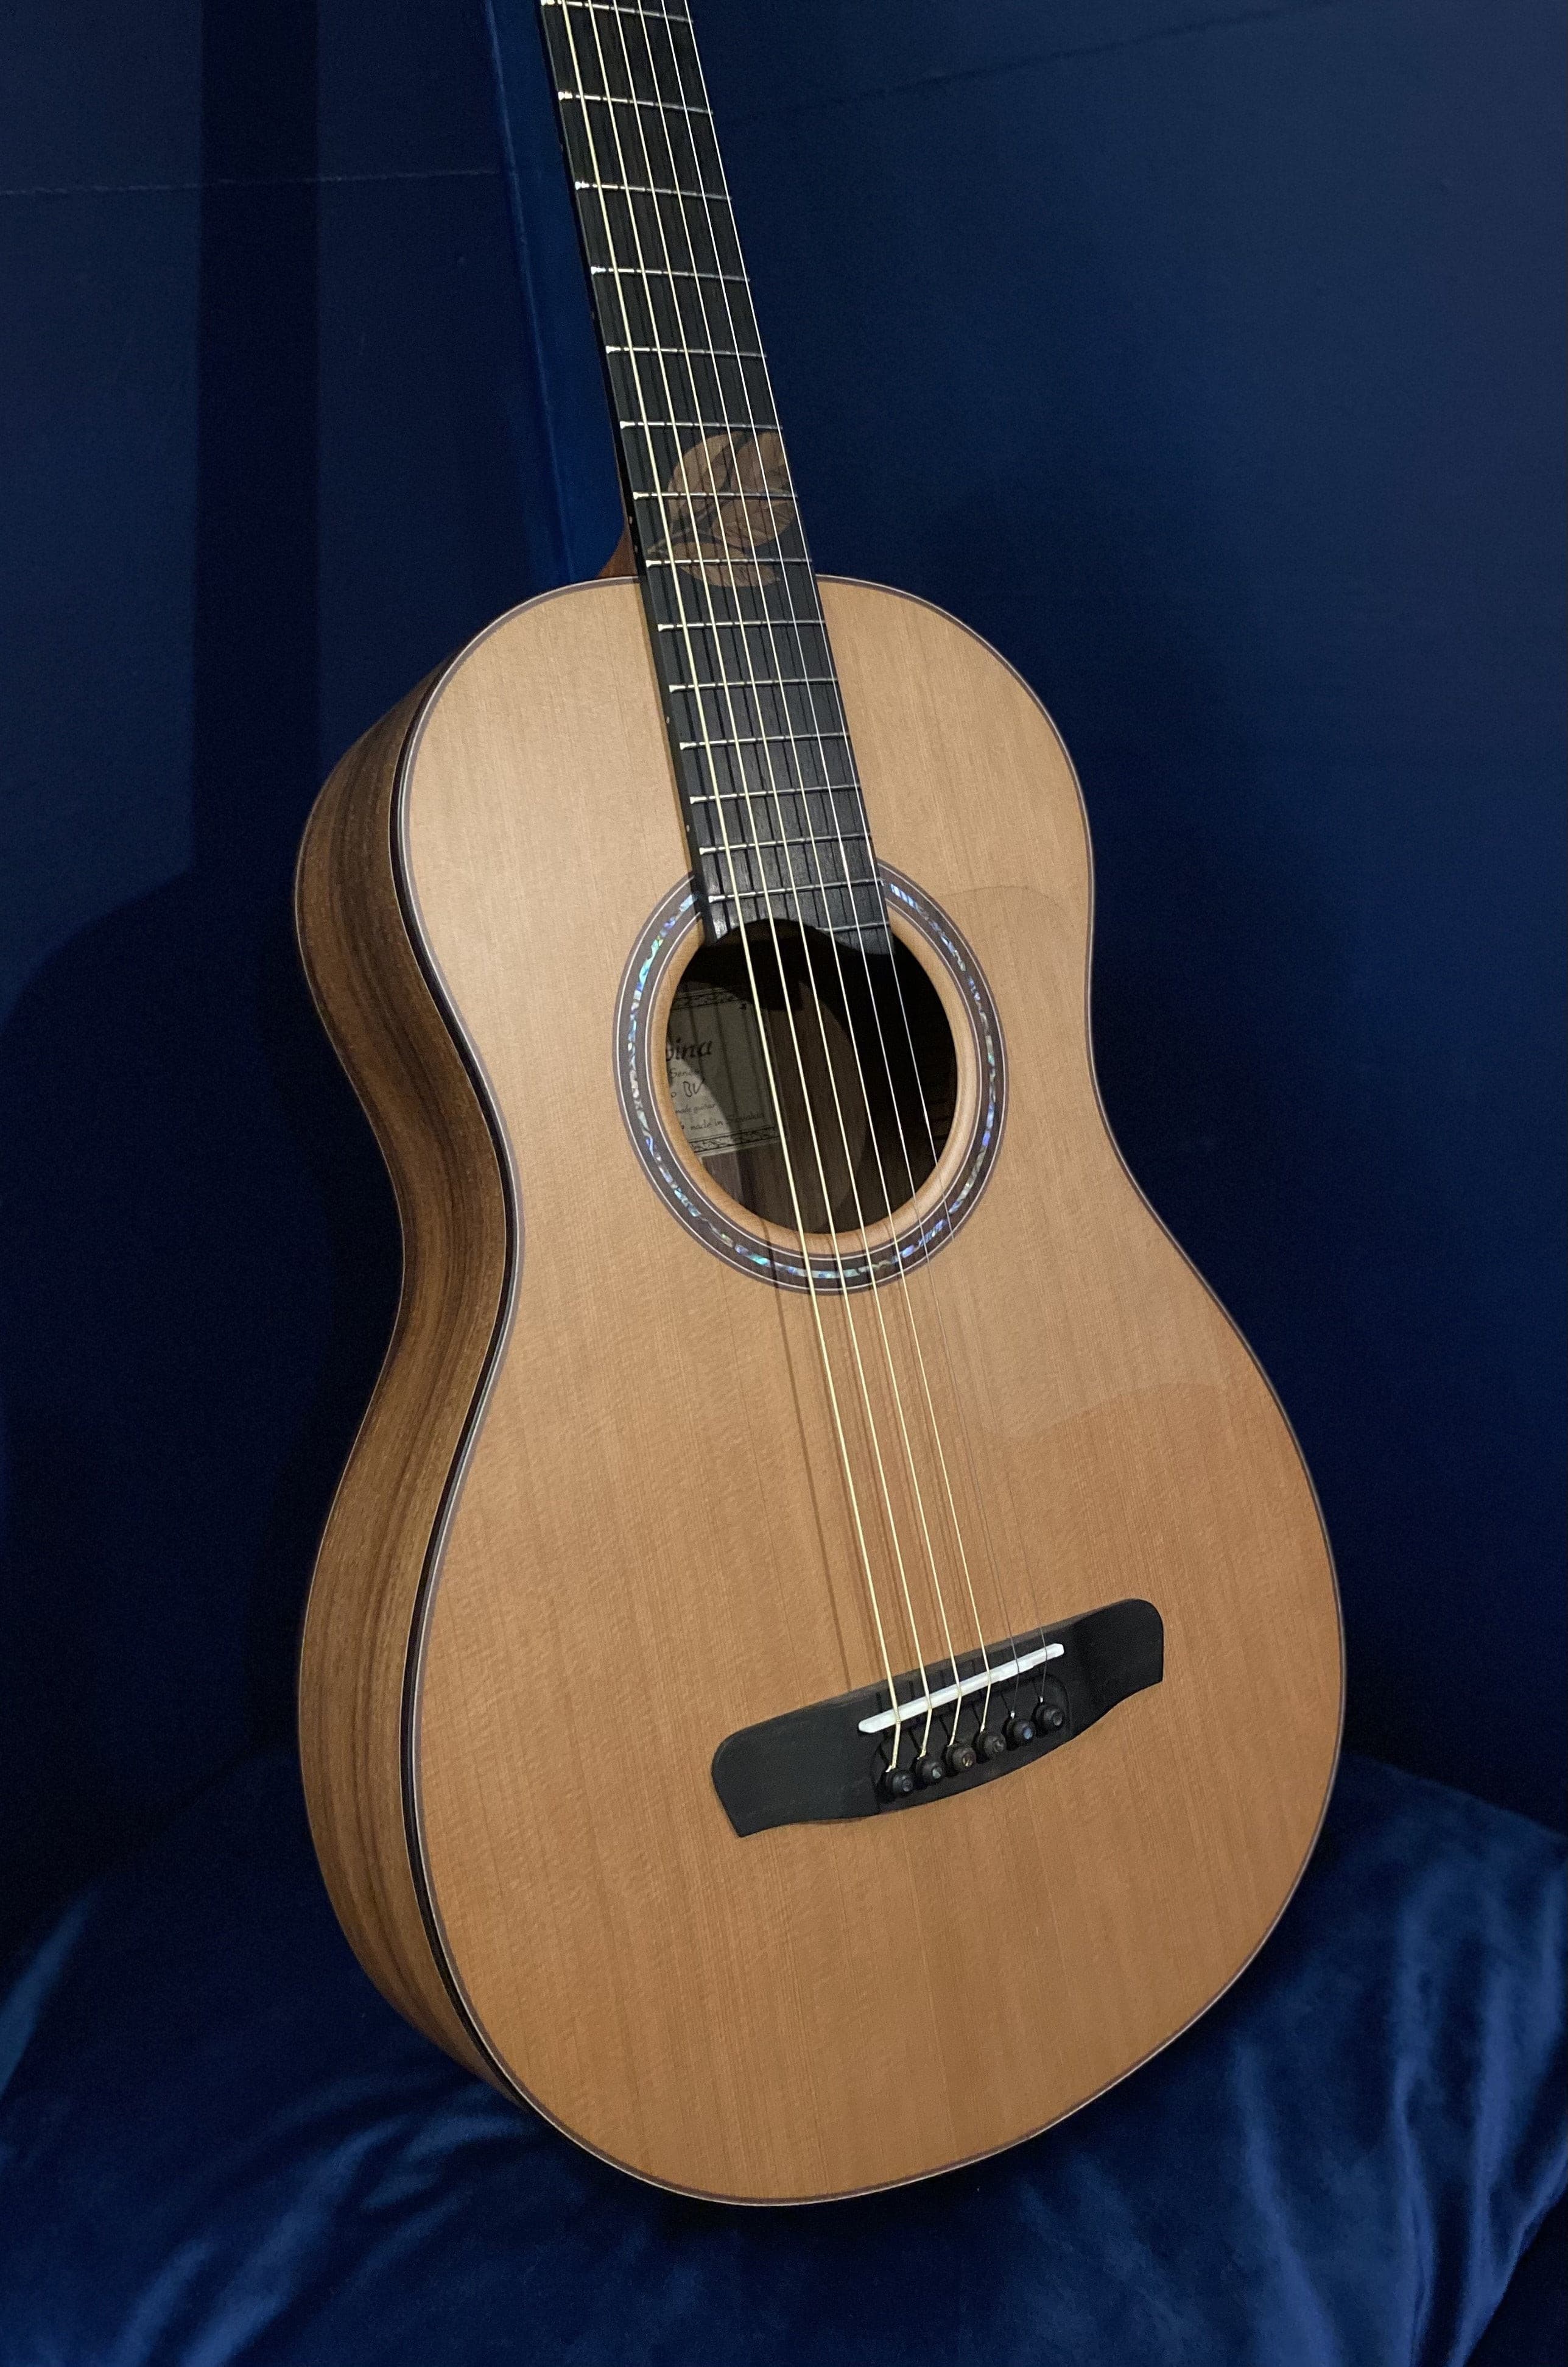 Dowina Master Build Madagascar Rosewood BV Custom With Slotted Headstock, Acoustic Guitar for sale at Richards Guitars.